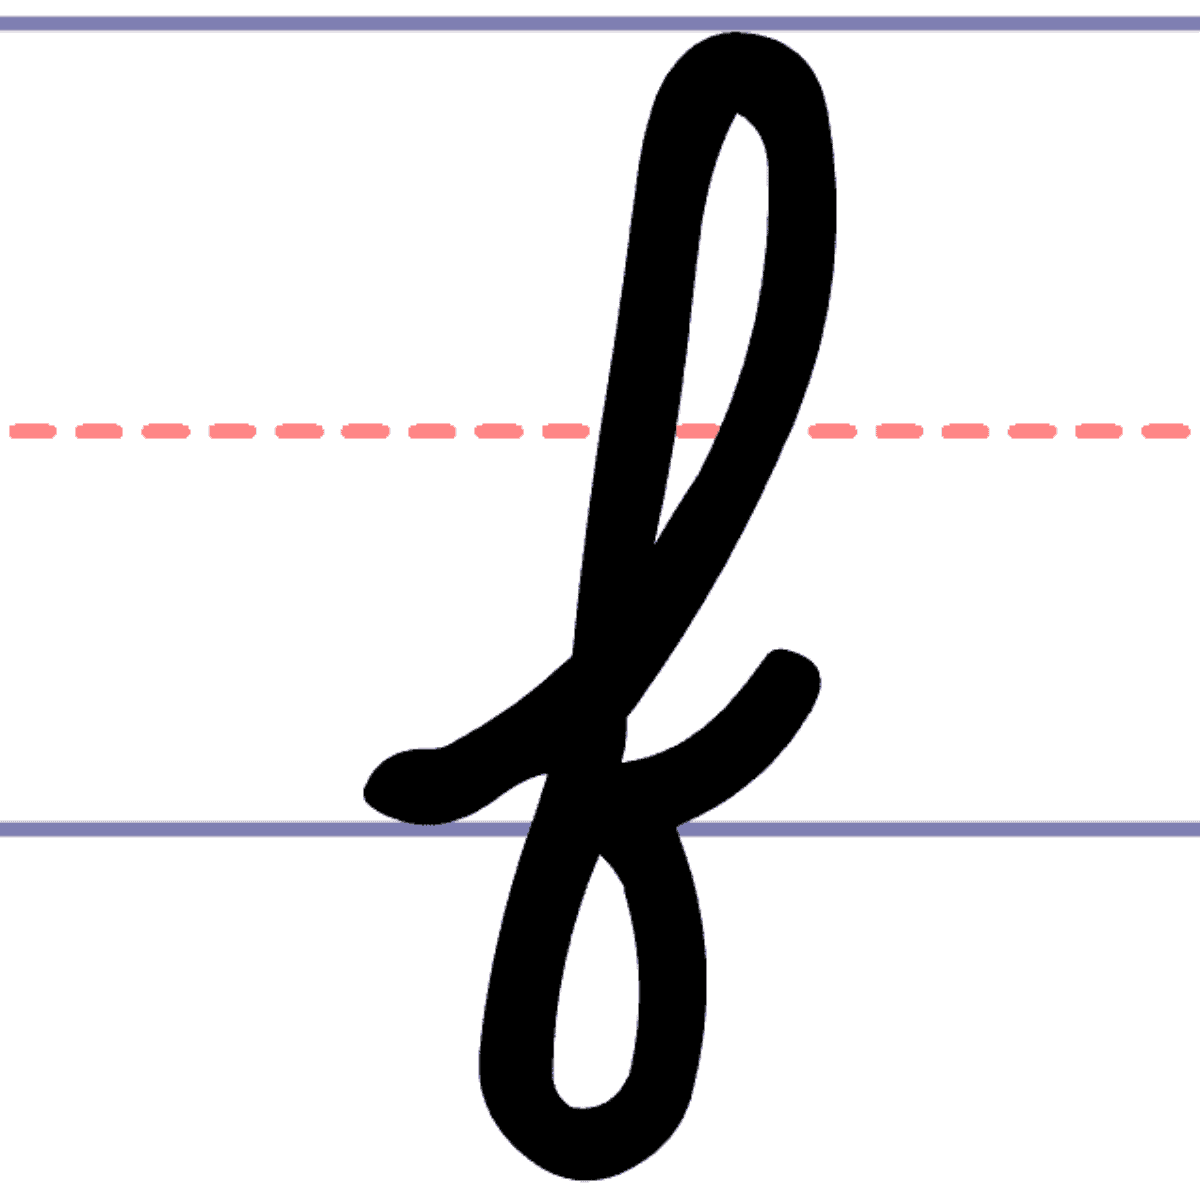 How to Write a Cursive Lowercase f